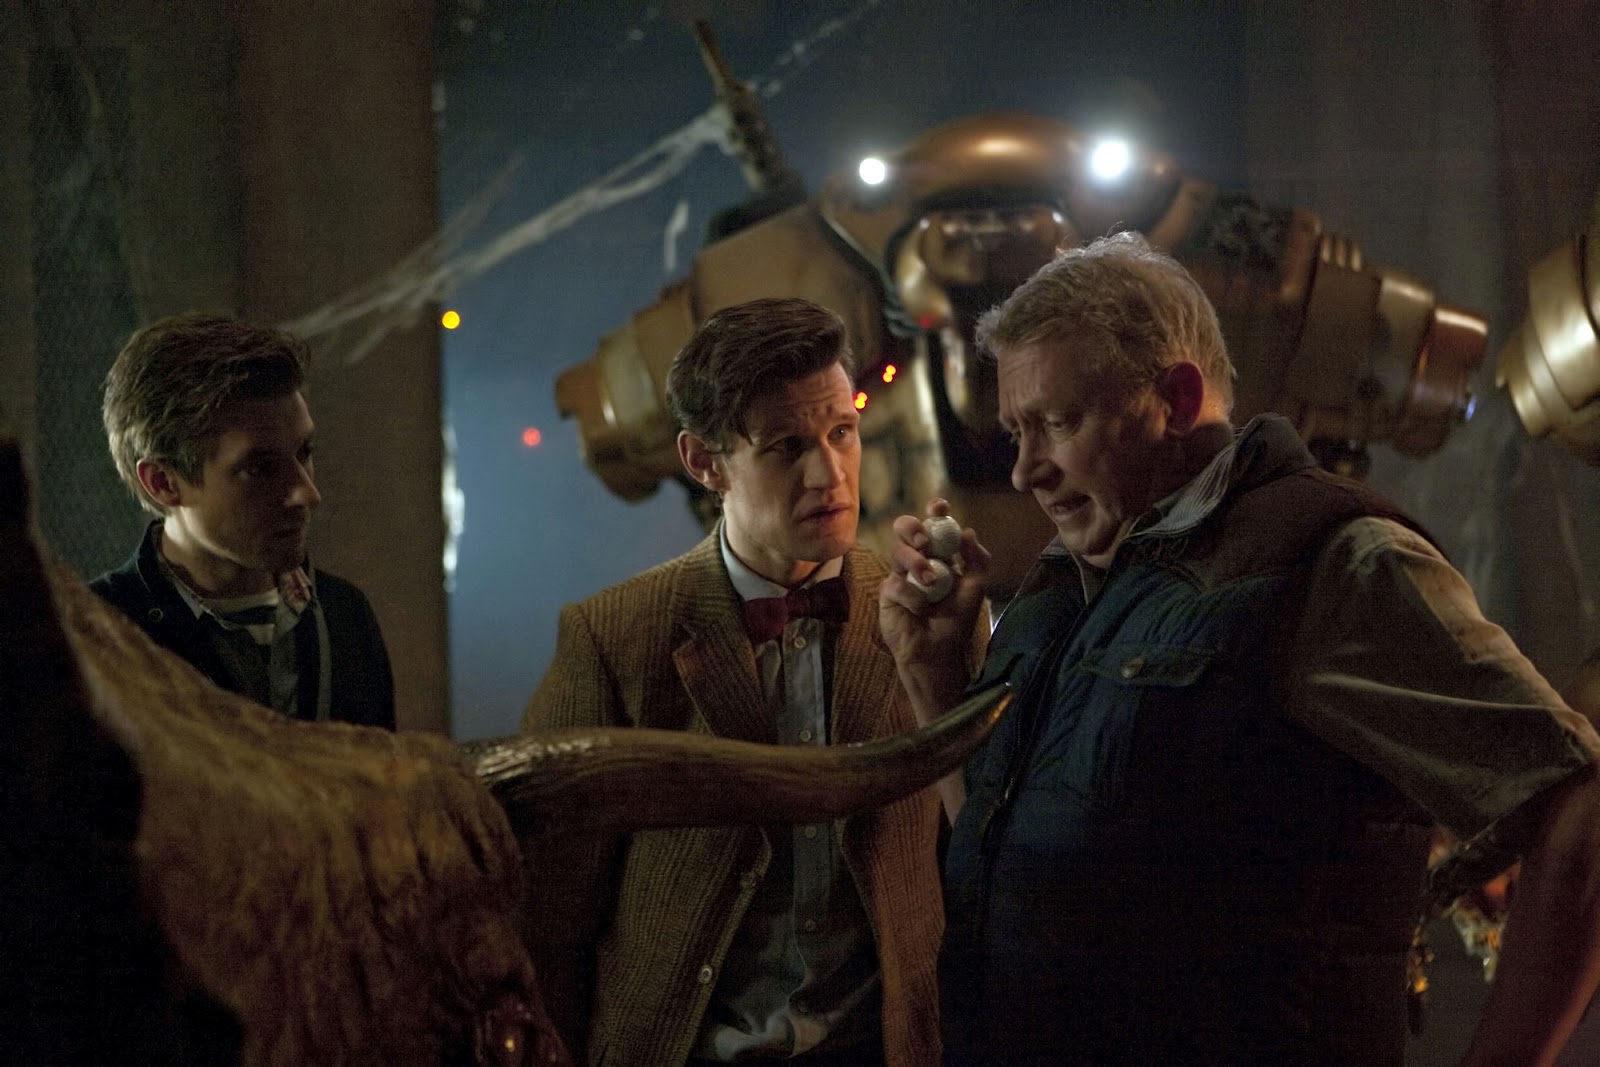 Doctor Who series 7: Dinosaurs on a Spaceship